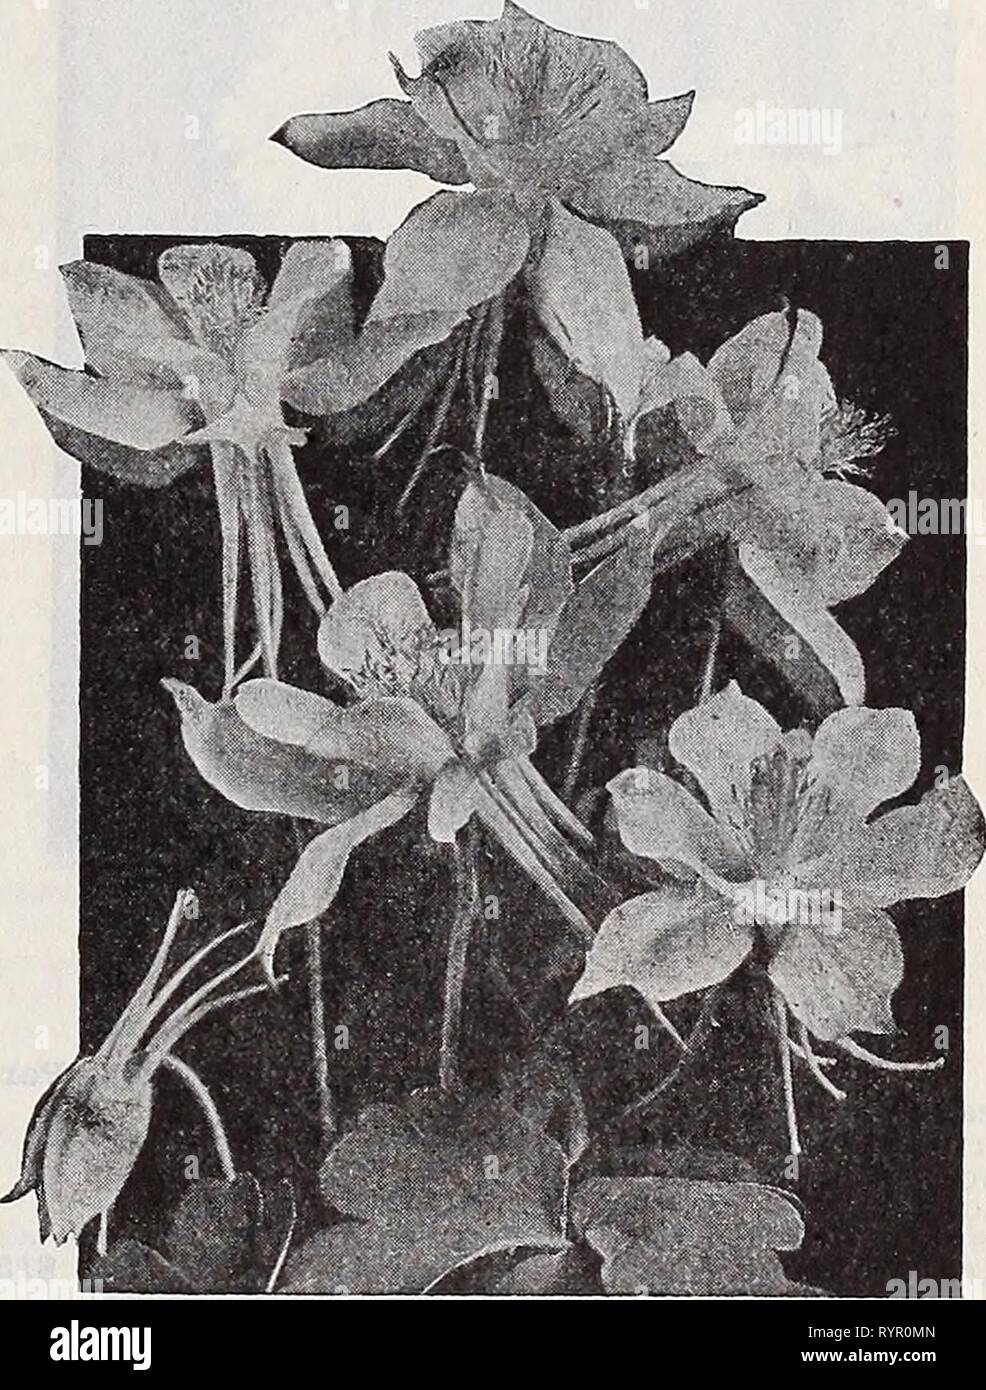 Dreer's wholesale catalog for florists Dreer's wholesale catalog for florists and market gardeners : 1939 winter spring summer . dreerswholesalec1939henr Year: 1939  Alyssum saxatile compactum Alyssum—Mad wort Per doz. Per 100 Saxatile compactum. 3-inch pots $1 50 $10 00 — fl. pi. 3-inch pots 3 50 25 00 Anchusa—Sea Bugloss, Alkanet Italica Morning Glory. One of the finest of this showy genus. Stout, much-branched stems smothered with large brilliant rich blue flowers. May to June; 5 ft., 3%%%%%%%%-inch pots, $2.00 per doz.; $12.00 per 100. Anchusa myosotidiflora An entirely distinct species gr Stock Photo